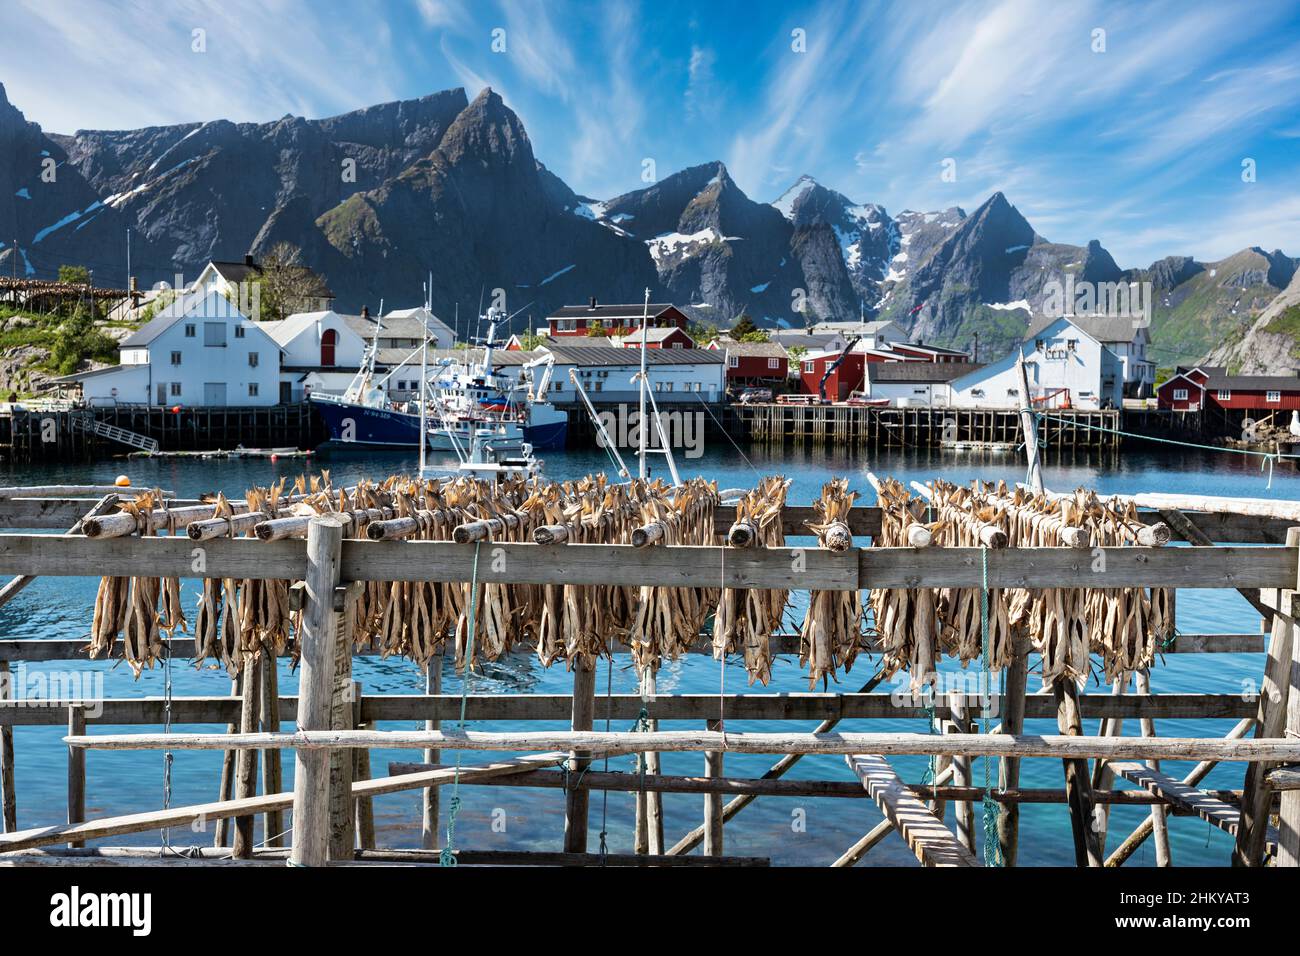 Drying fish in the traditional manner on open air racking, Hamnoy, Lofoten Islands, Norway. Stock Photo